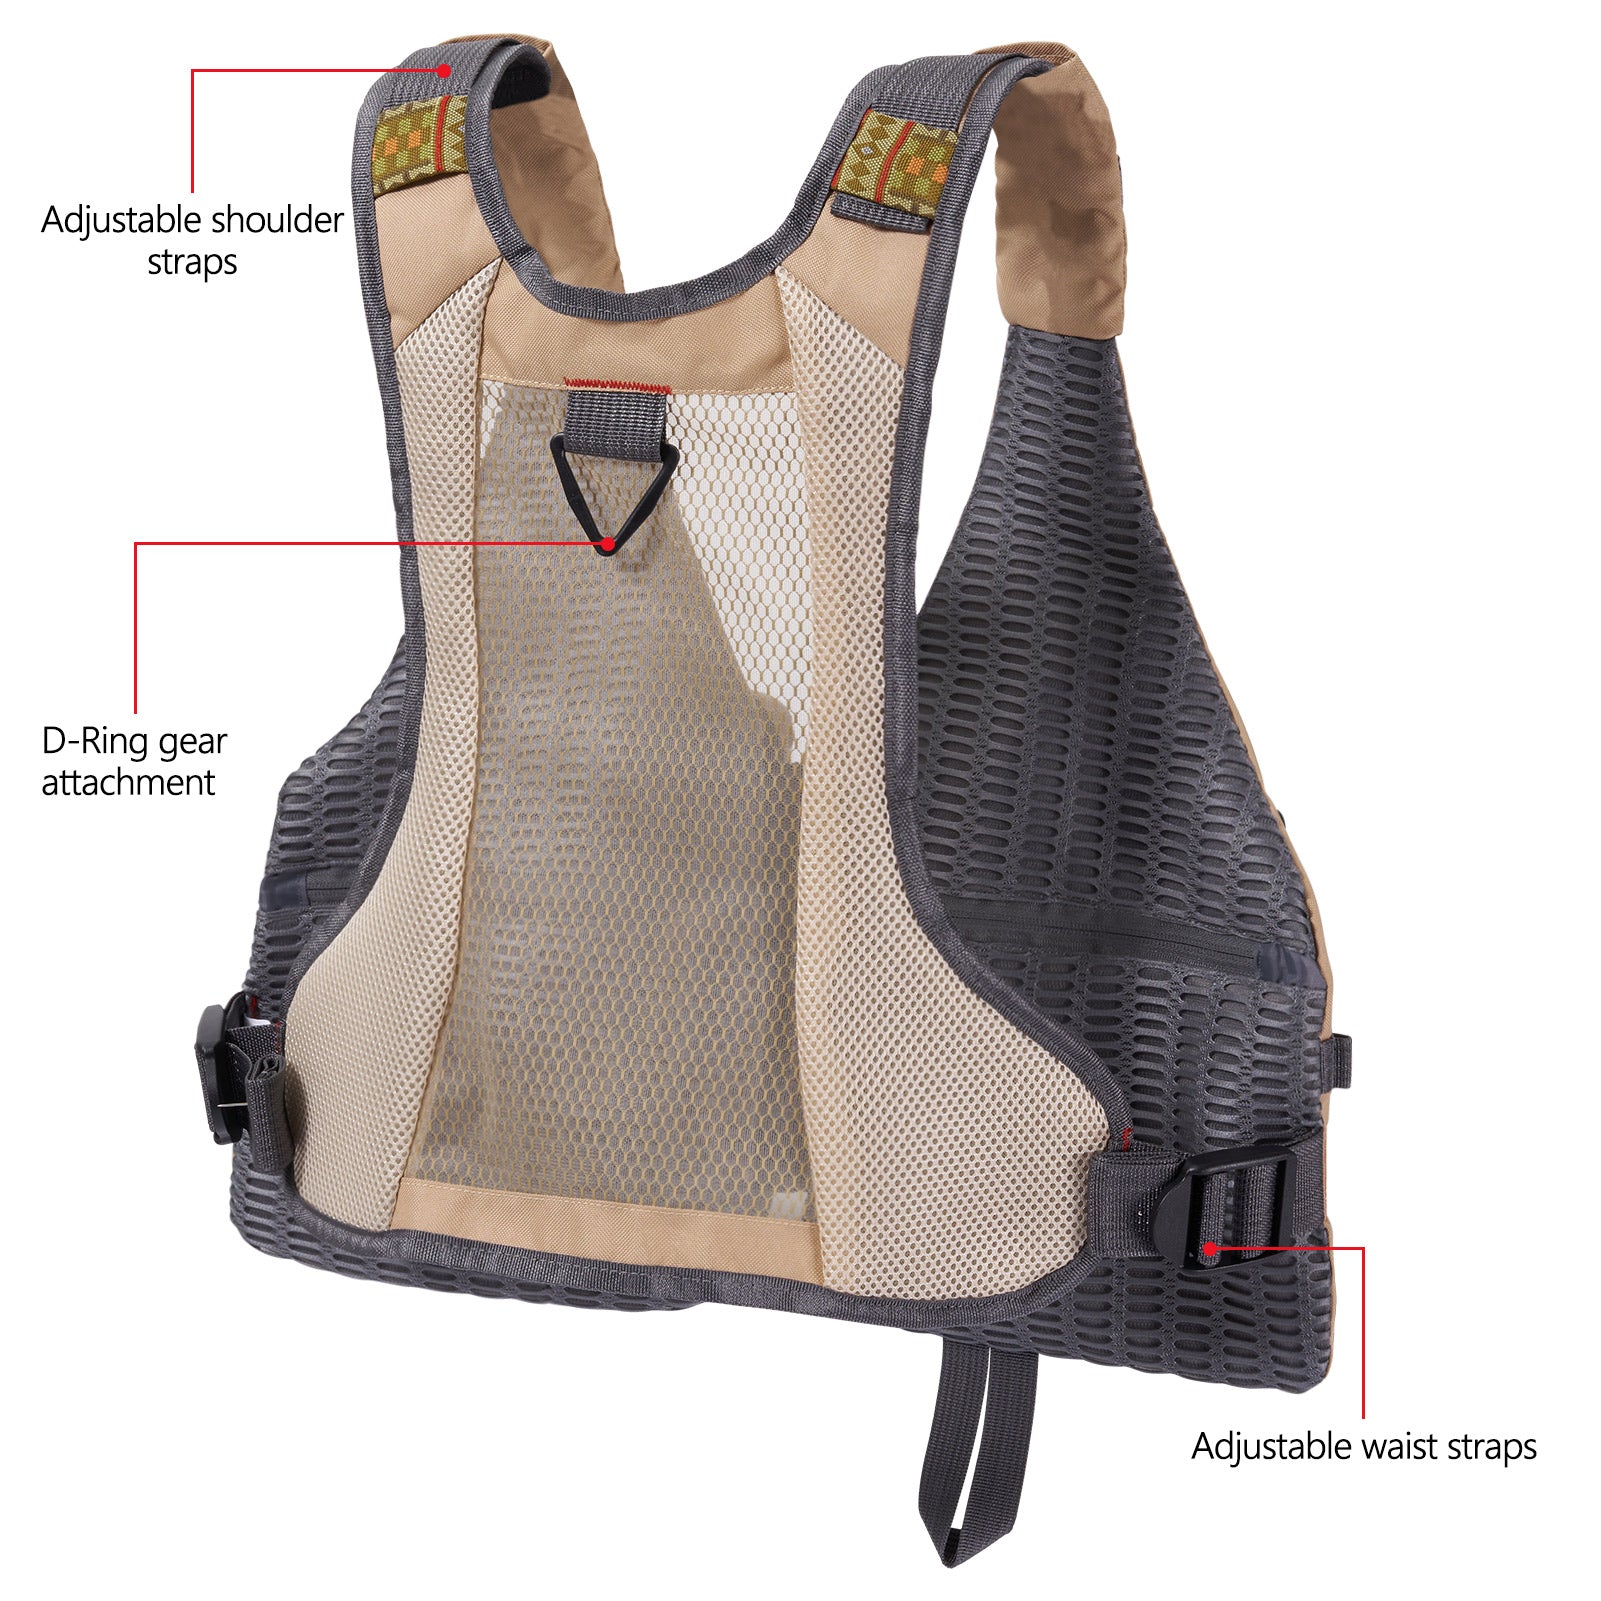 Bassdash - Enjoy the Bass fishing season with Bassdash vest - you'll have  the tackle and tools you need on hand at all times. View Bassdash vests in  various types:  #Bassdashfishing #